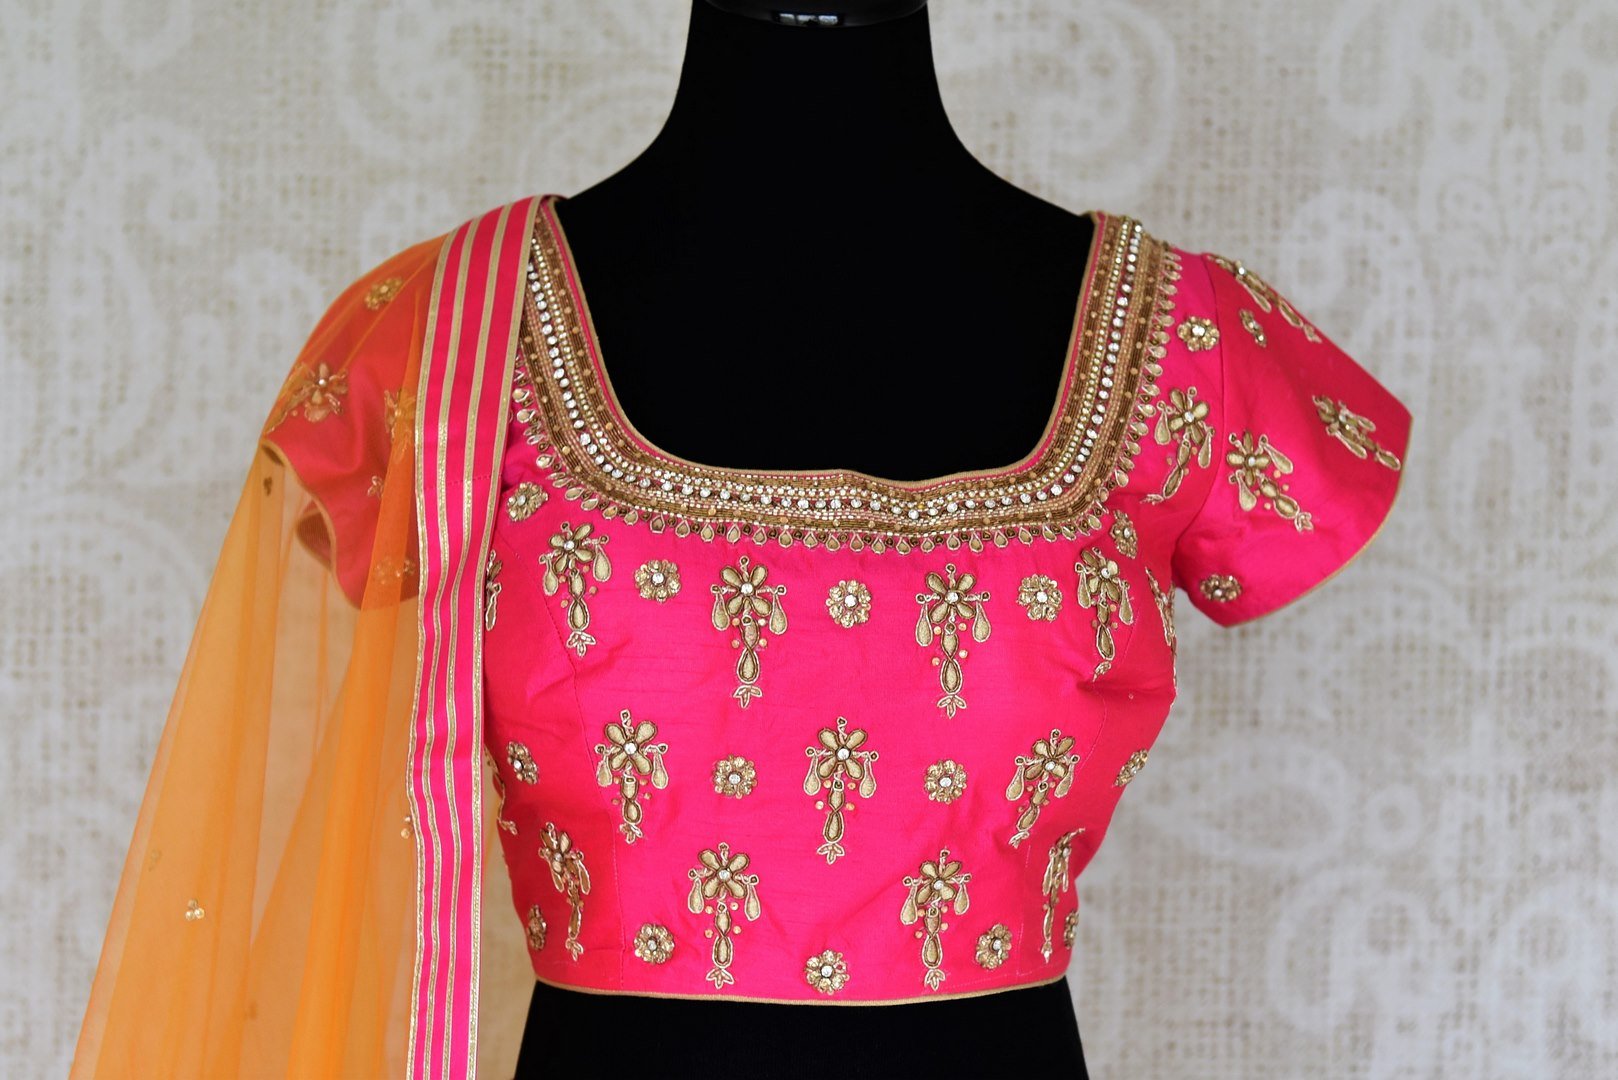 Leave them spellbound as you show up in this jaw-dropping white chanderi silk lehenga accompanied with a stunning hot pink zardosi embroidered blouse. Complete the look with the orange sequinned net dupatta with pink border. Shop Indian dress, lehenga choli, ikkat sari online or visit Pure Elegance store, USA.-blouse front